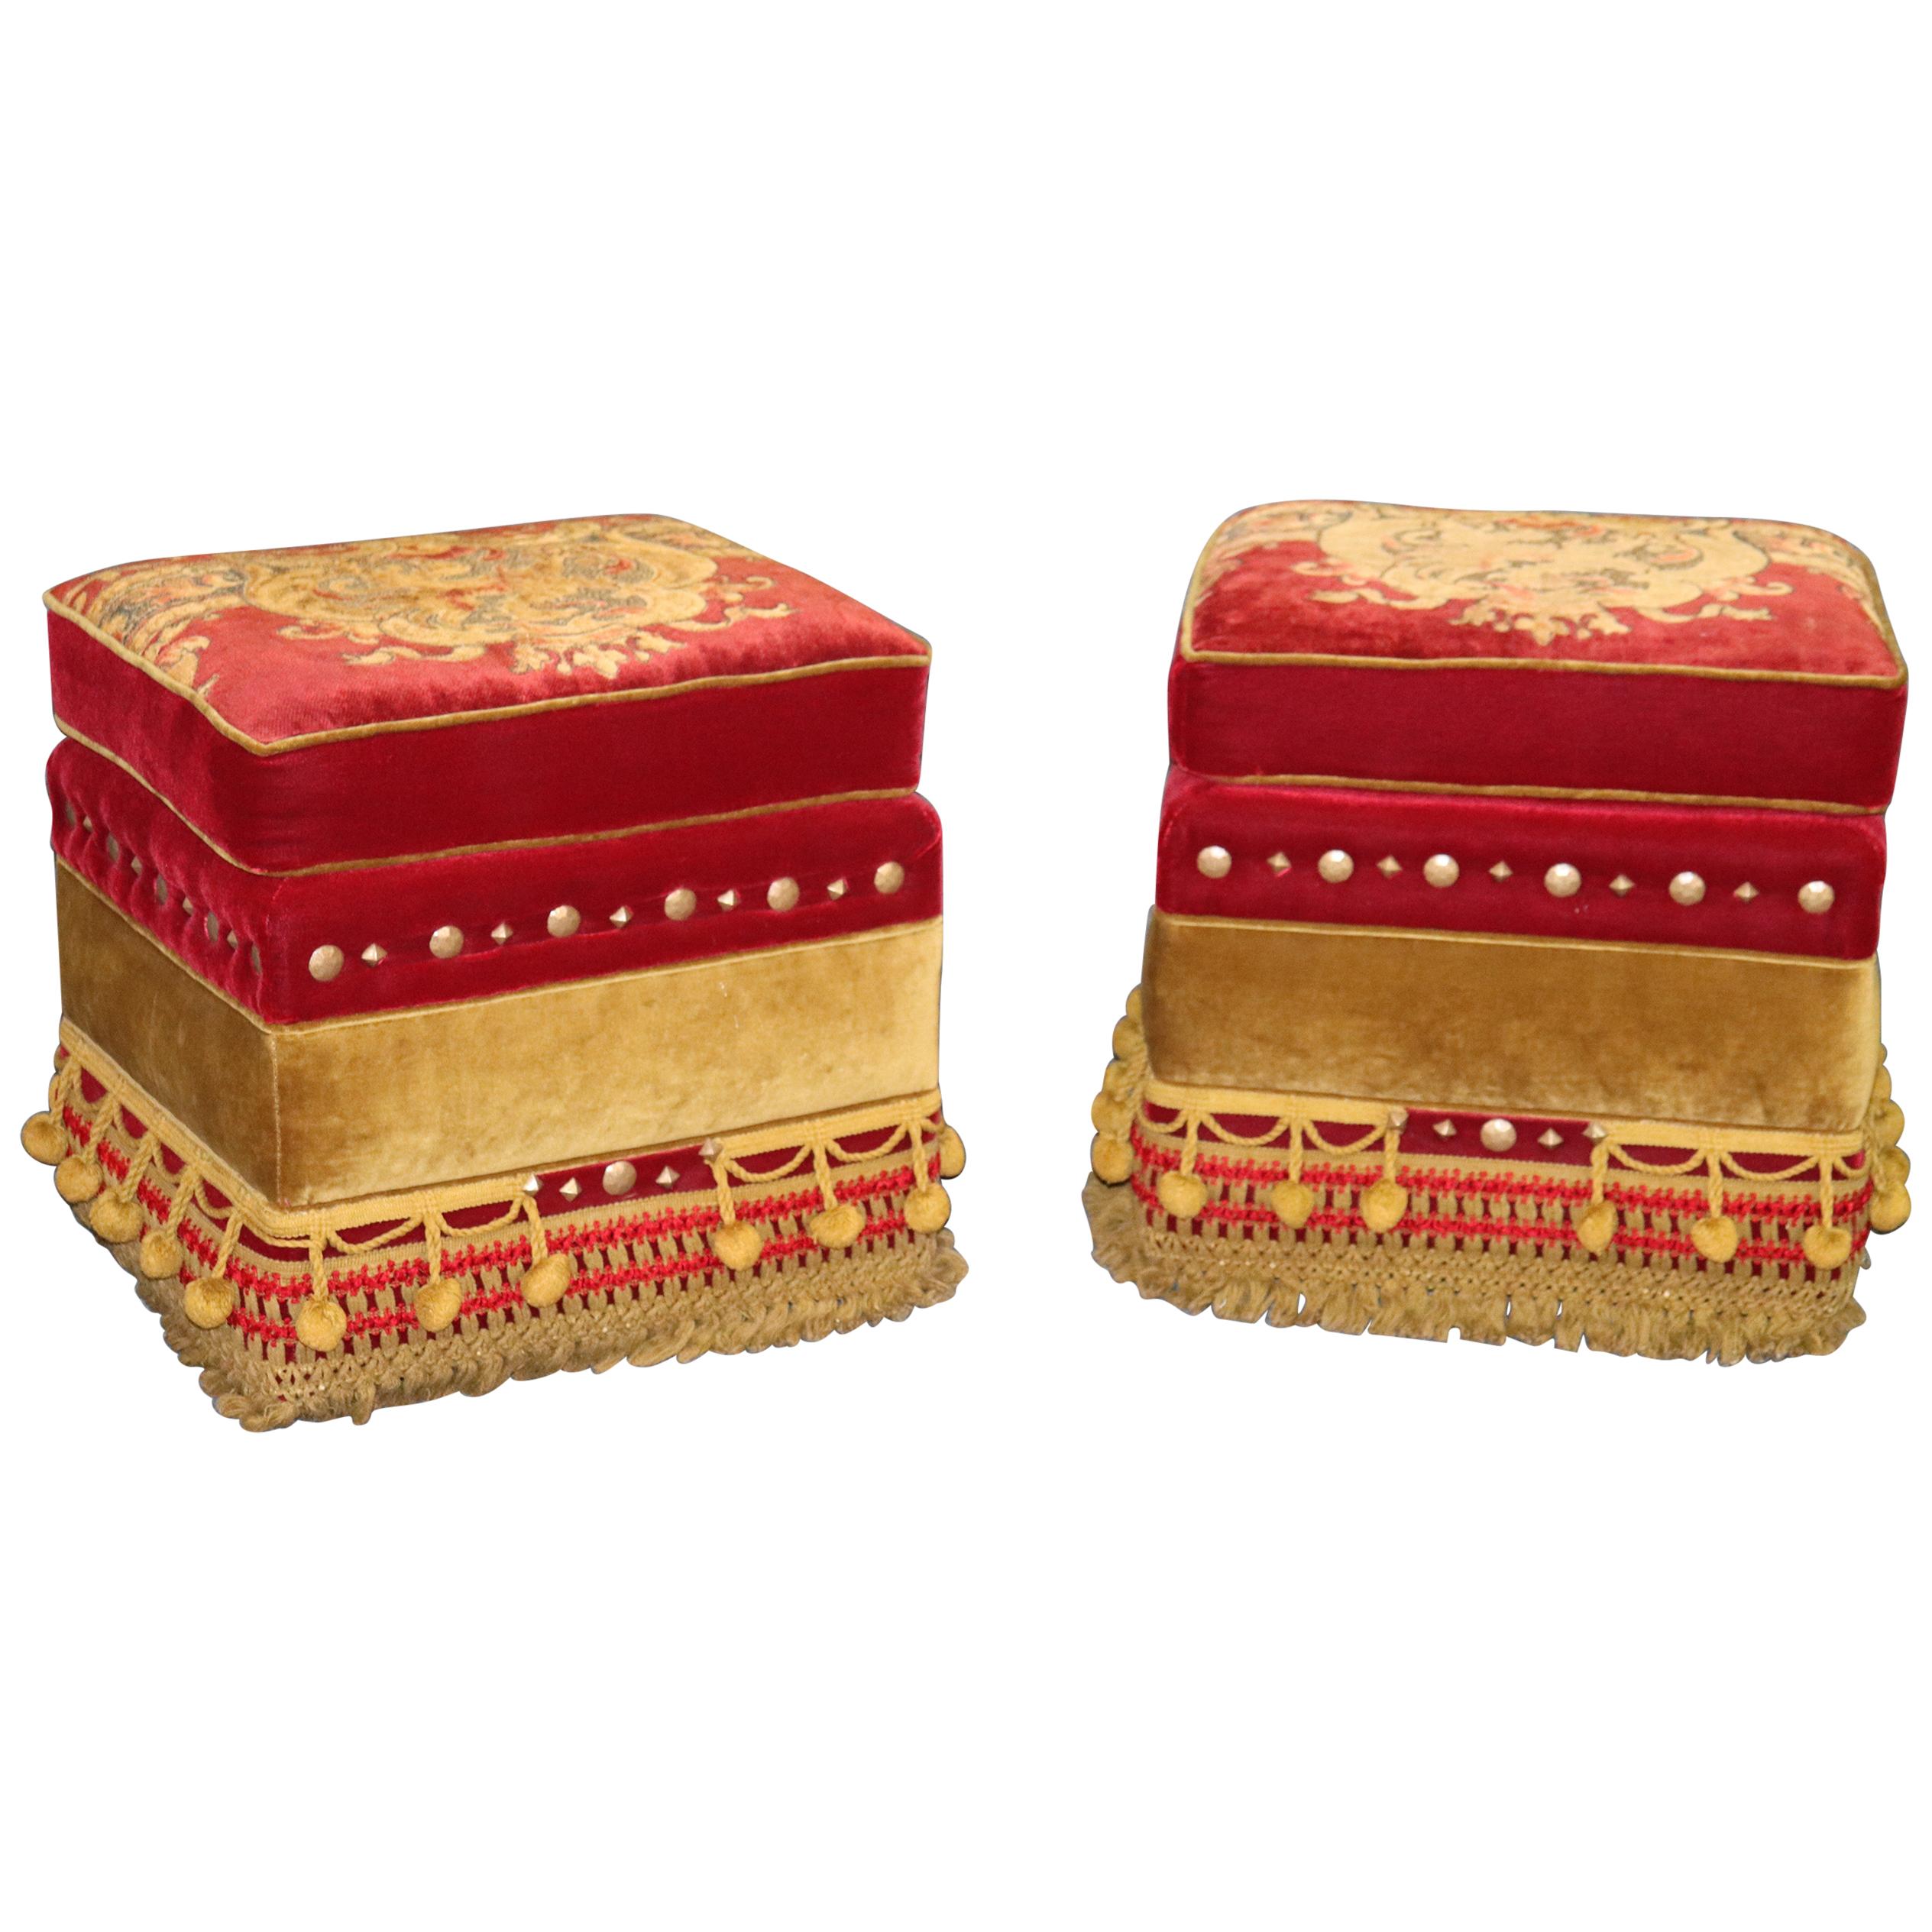 Pair of Rolling Embroidered Tassled Hollywood Regency Squarish Ottomans Stools